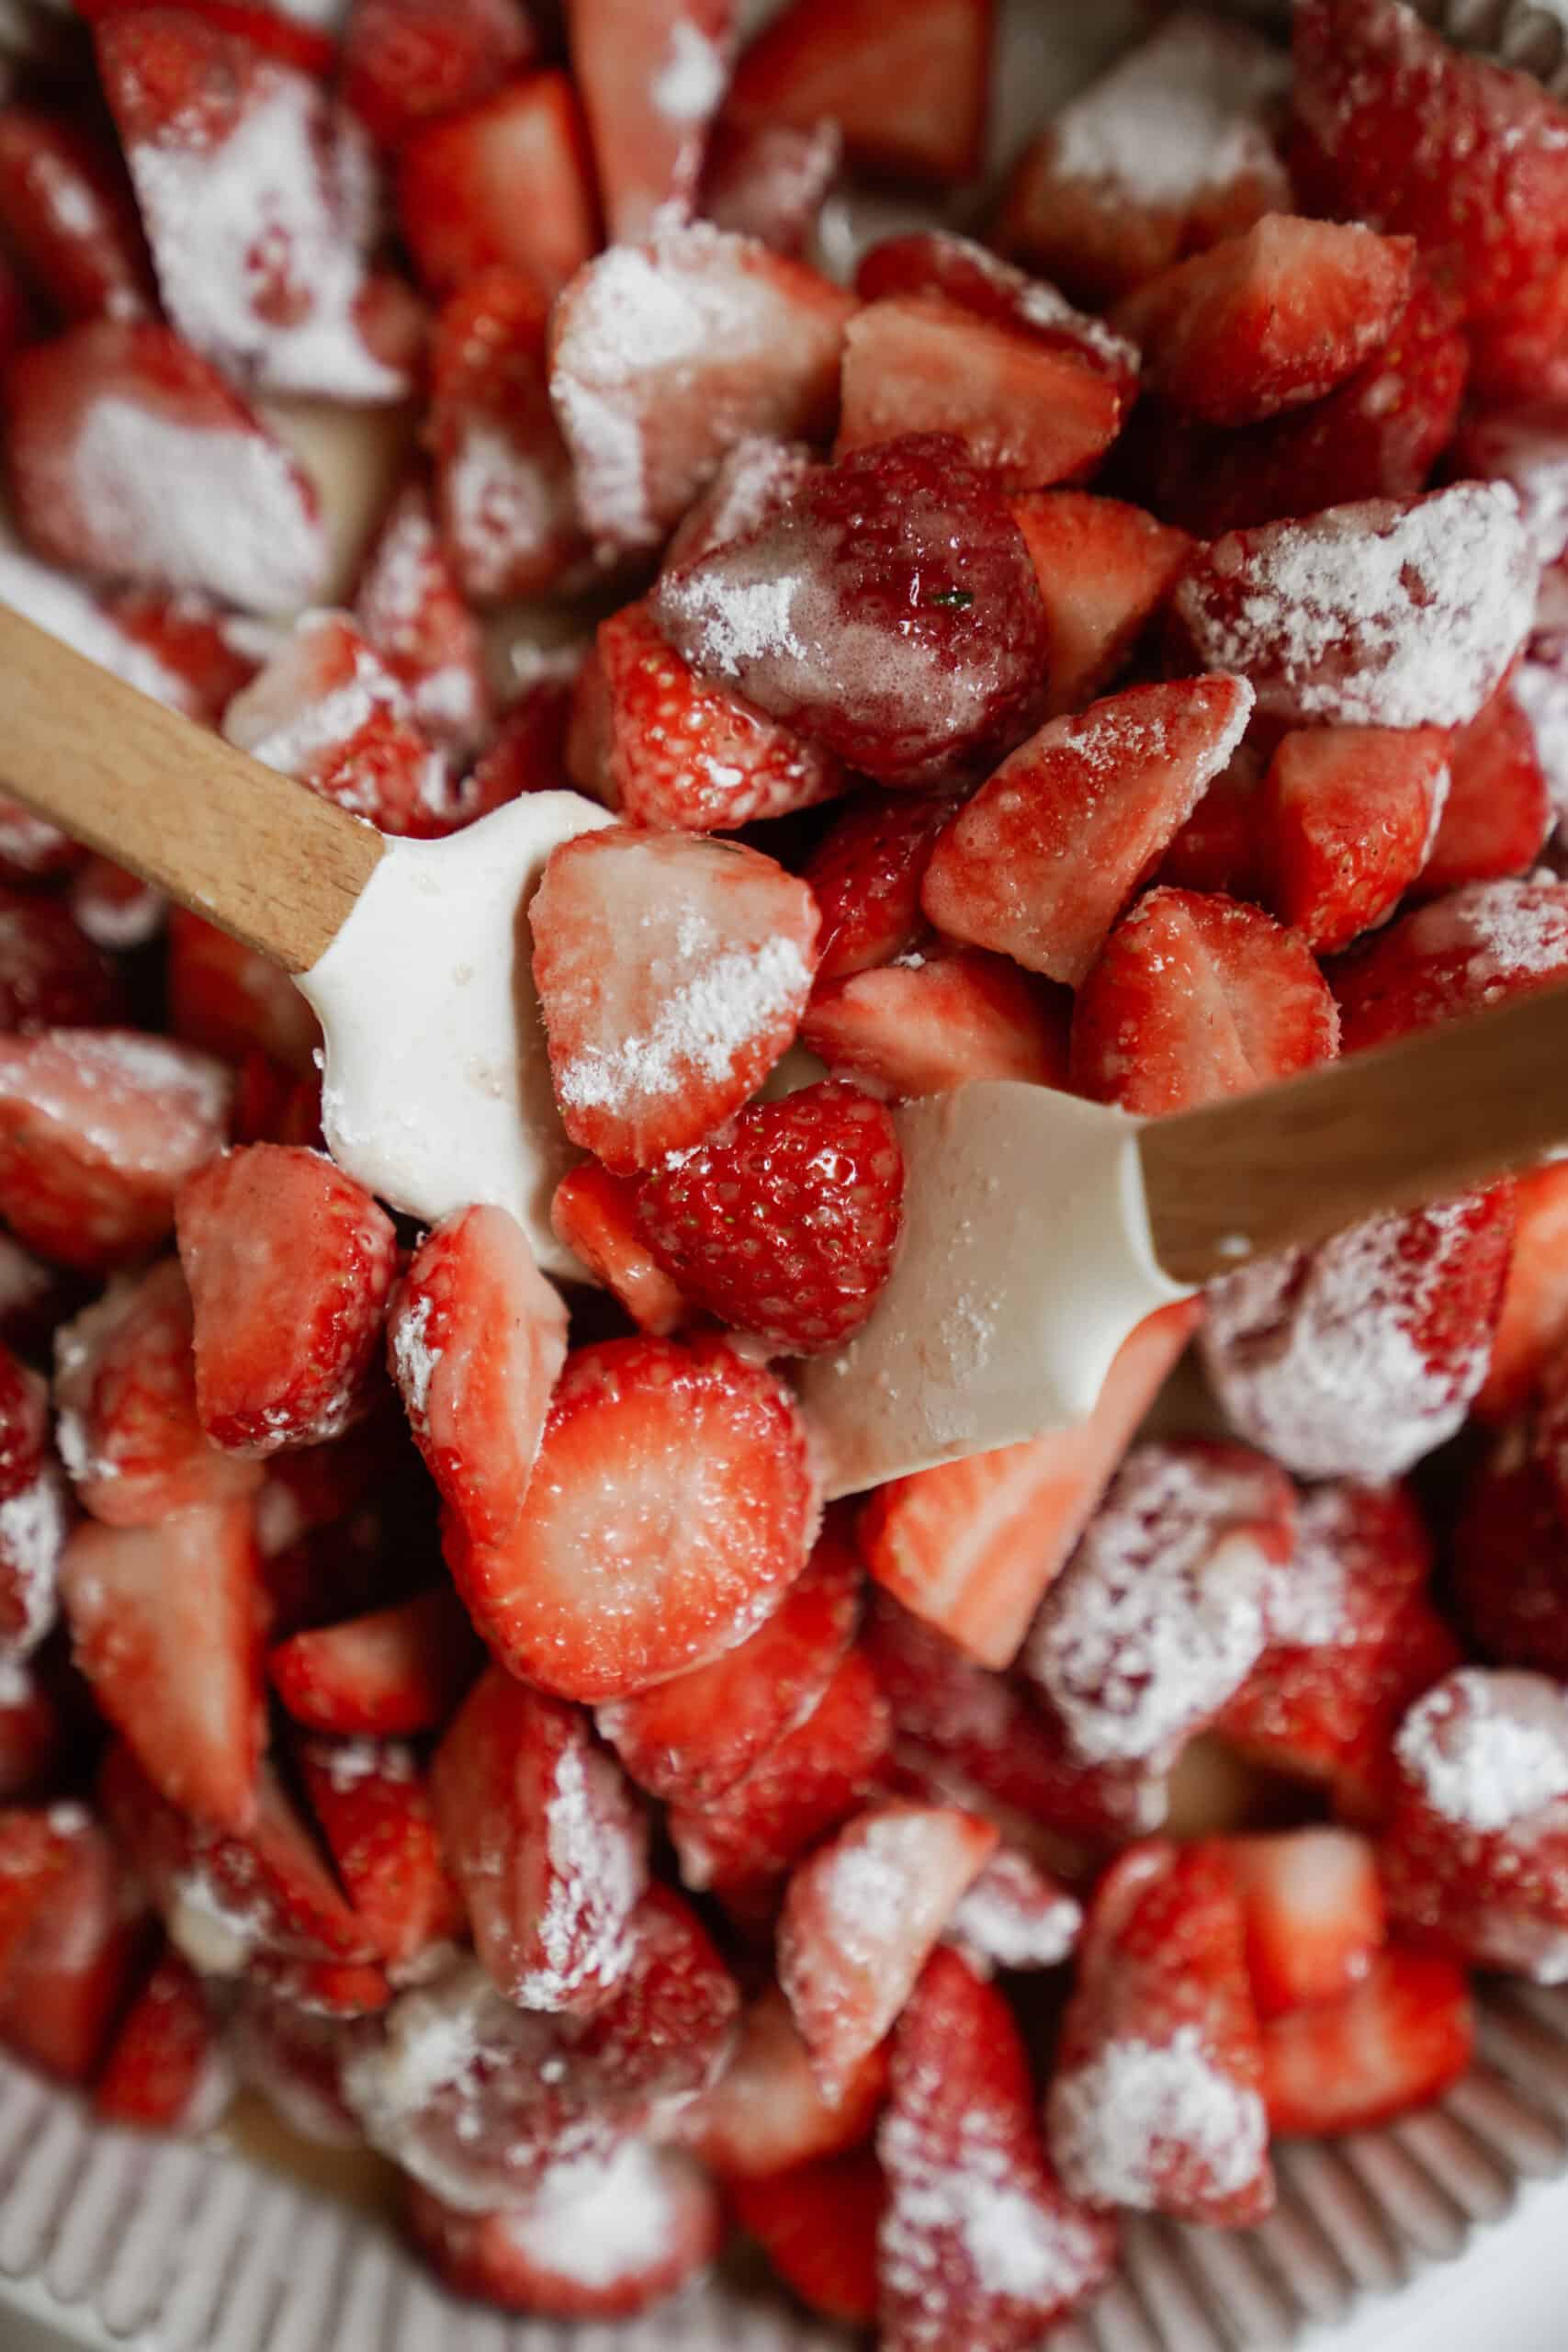 Tossing strawberries for strawberry crumble together